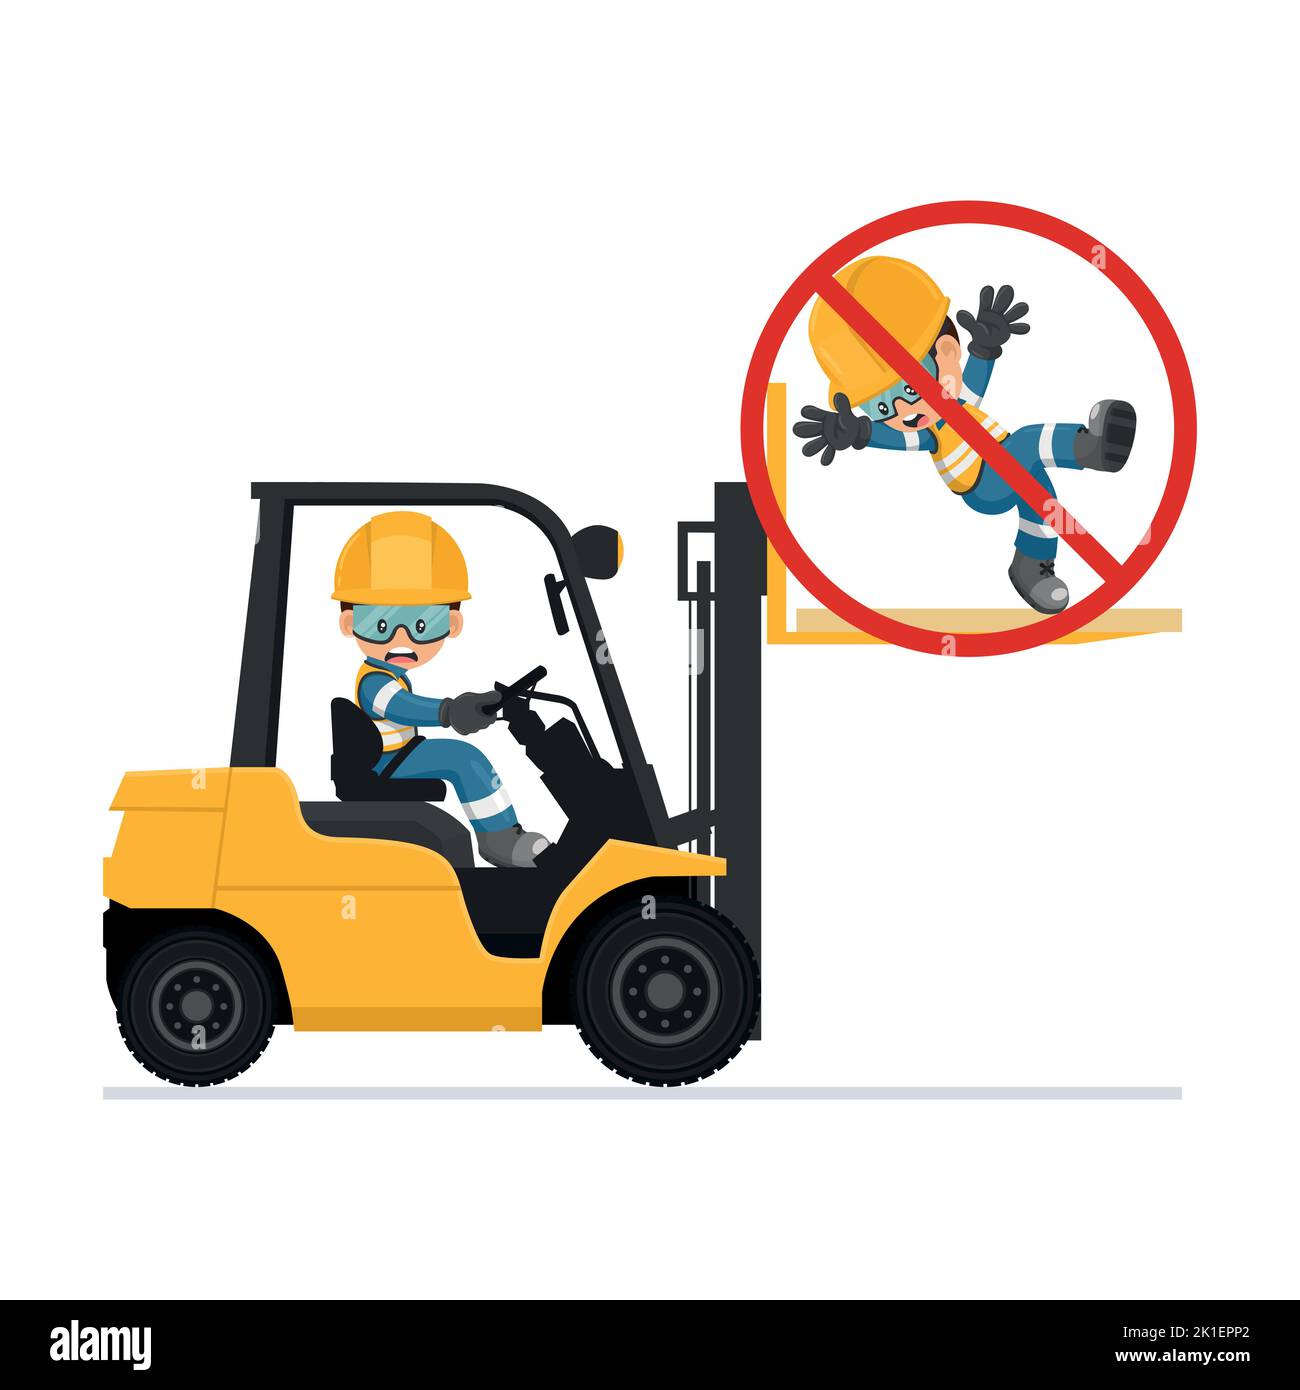 transporting-people-on-the-forklift-is-prohibited-dangers-of-driving-a-forklift-forklift-driving-safety-work-accident-in-a-warehouse-security-firs-2K1EPP2.jpg